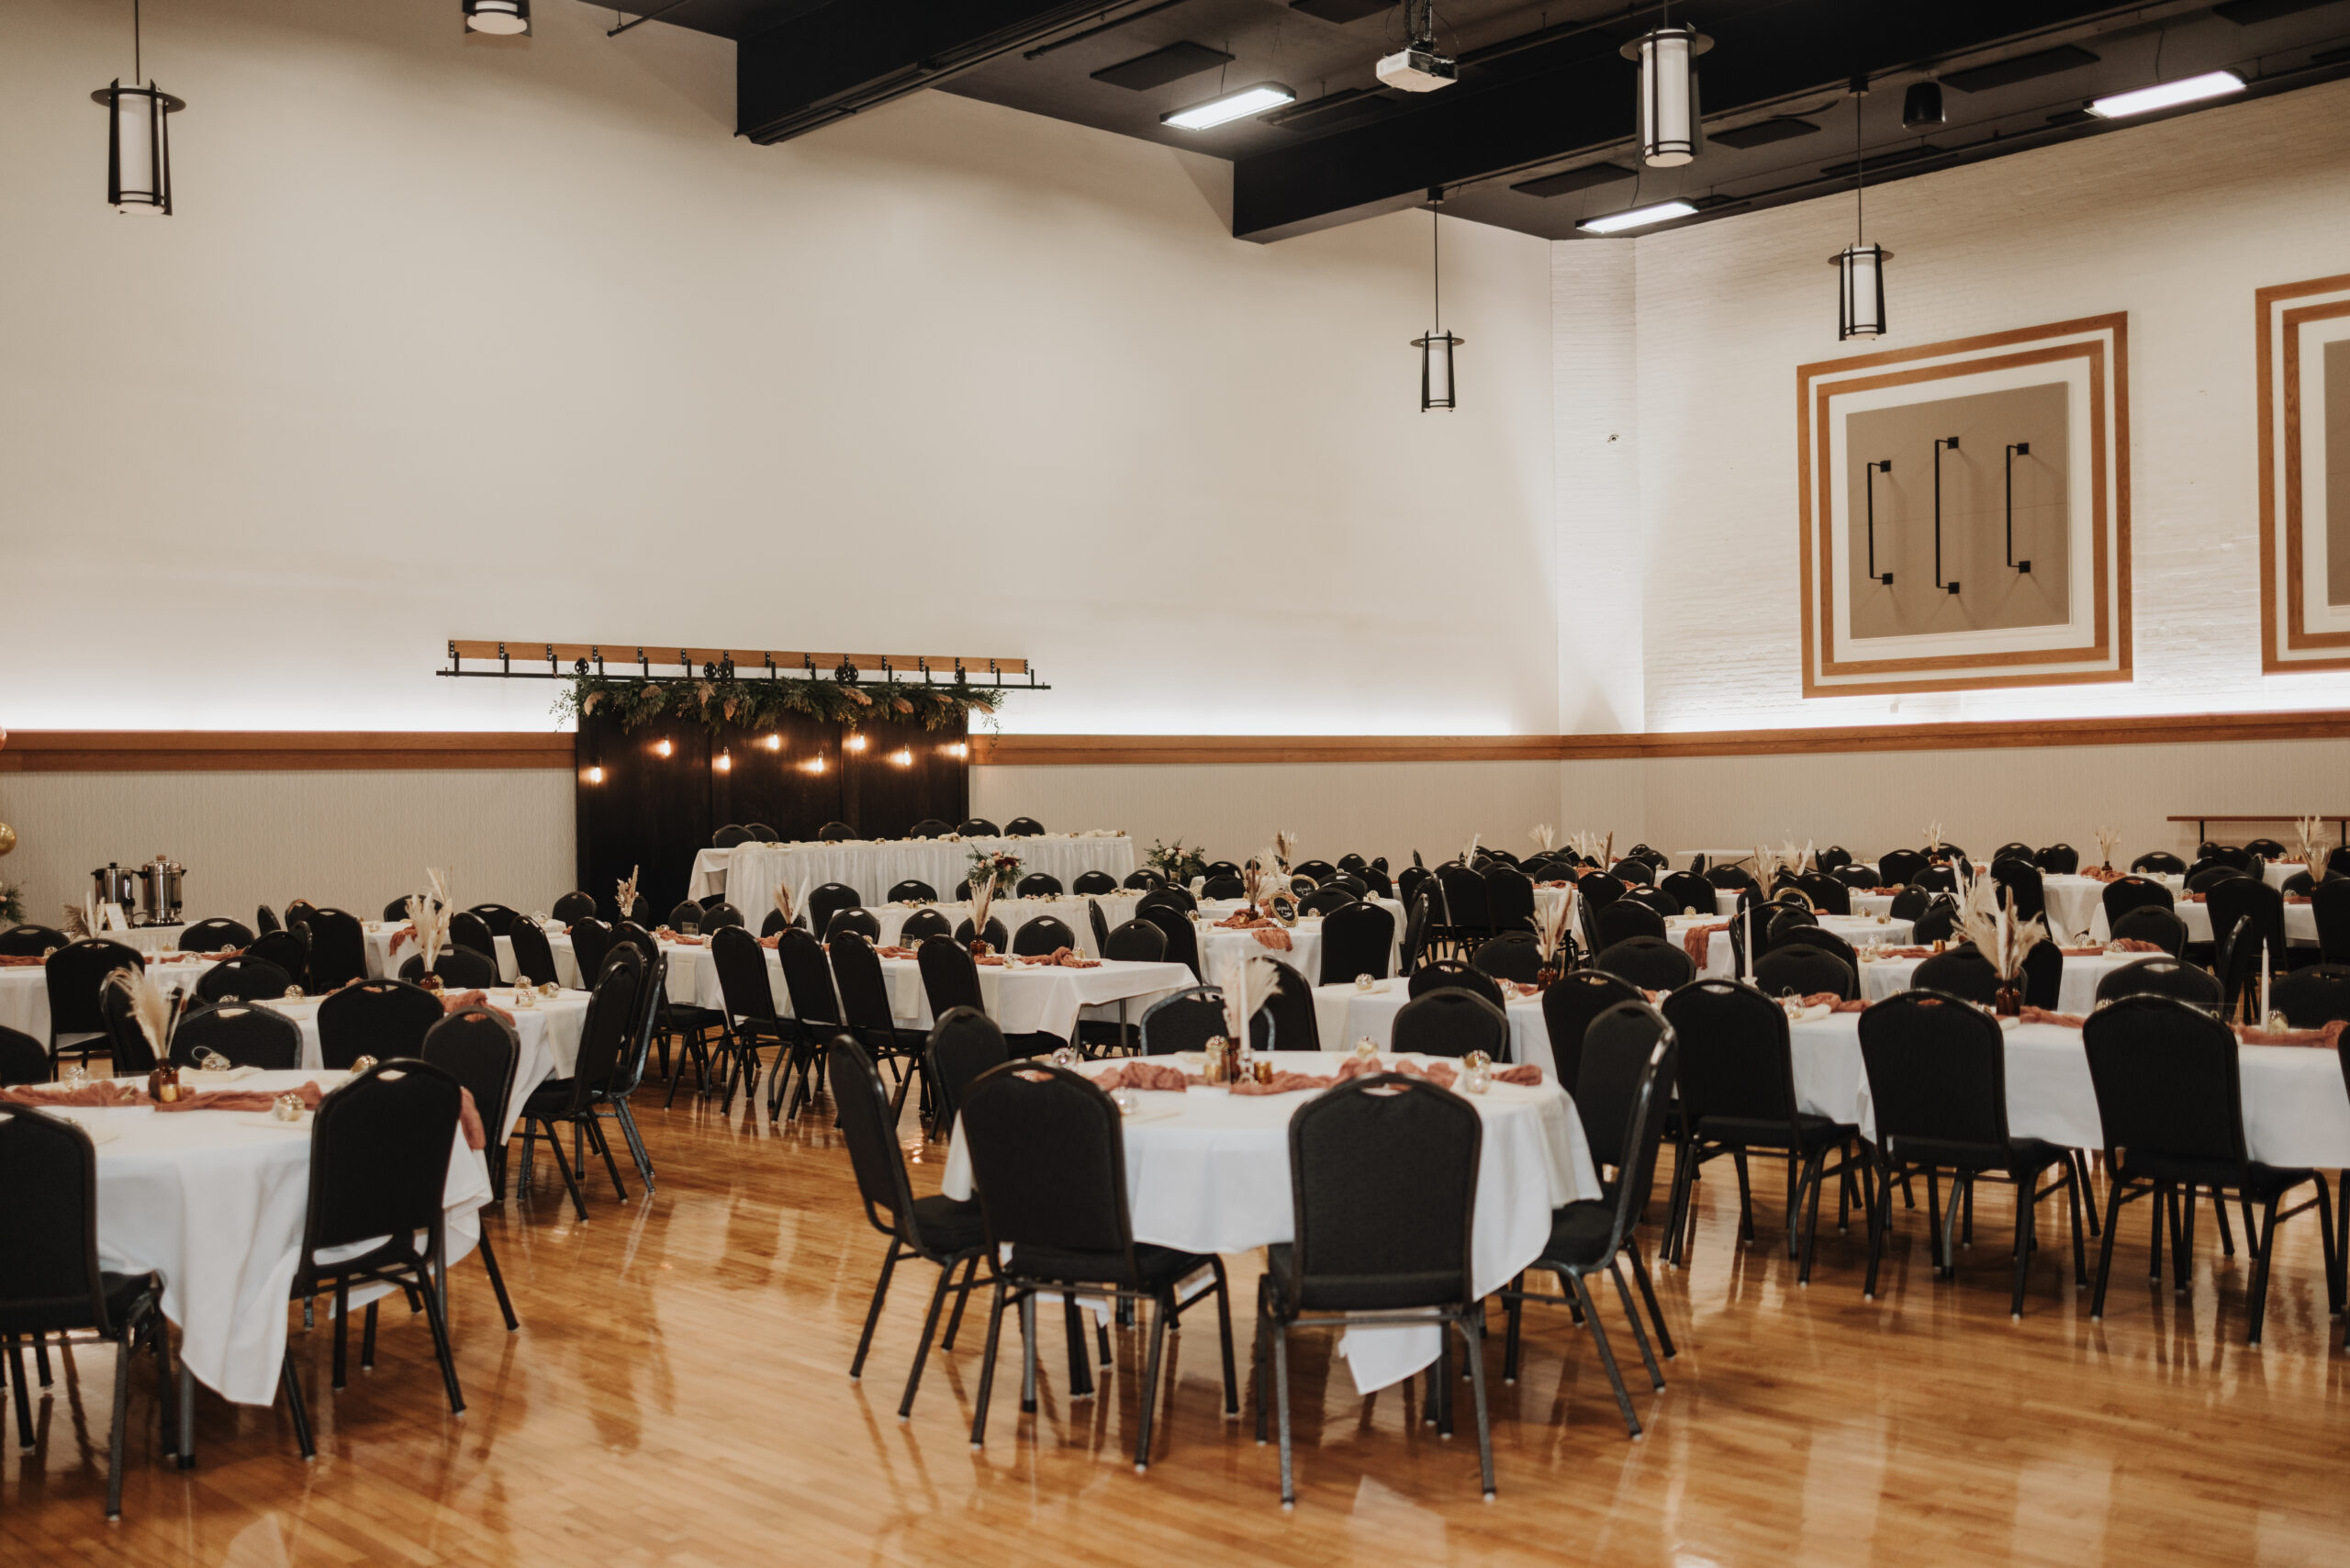 White linens on round tables in the Historic Holmes Theatre Ballroom